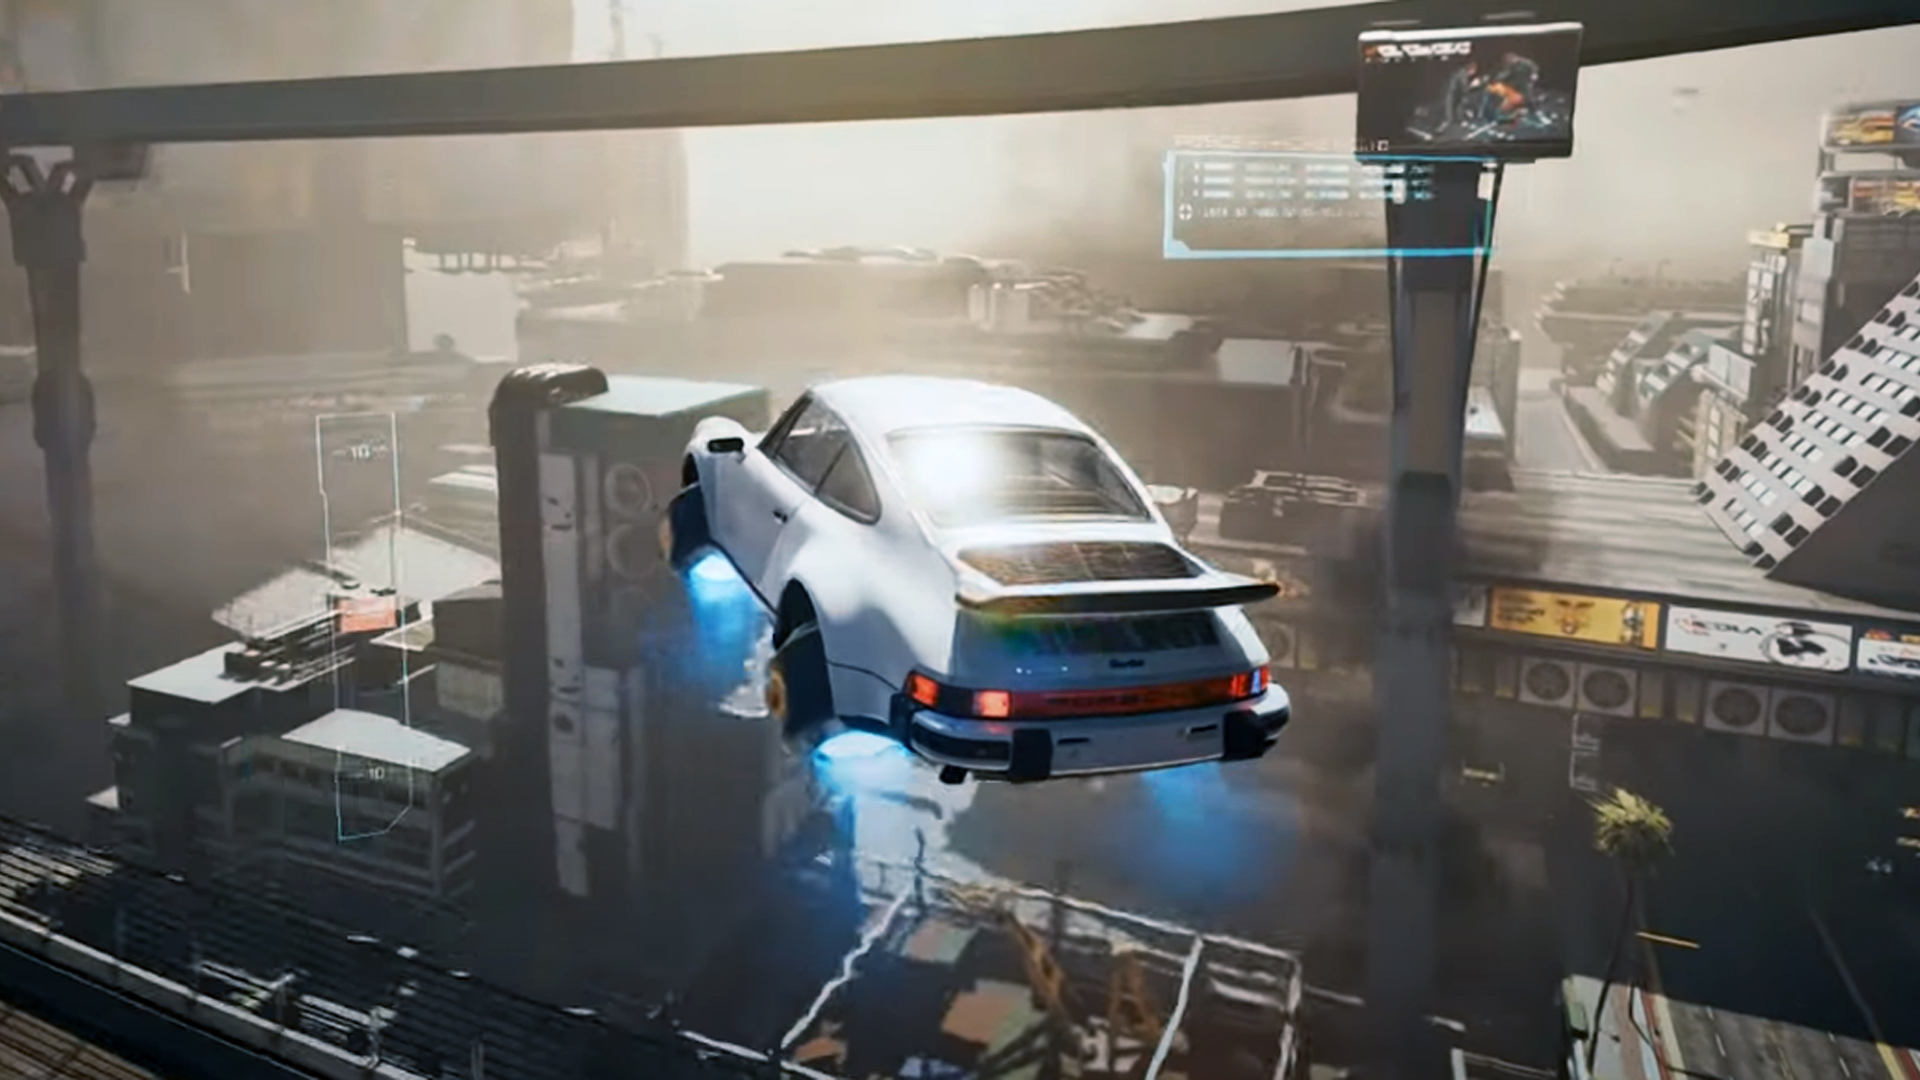 Finally, a Cyberpunk 2077 mod that gives you a flying car - TrendRadars